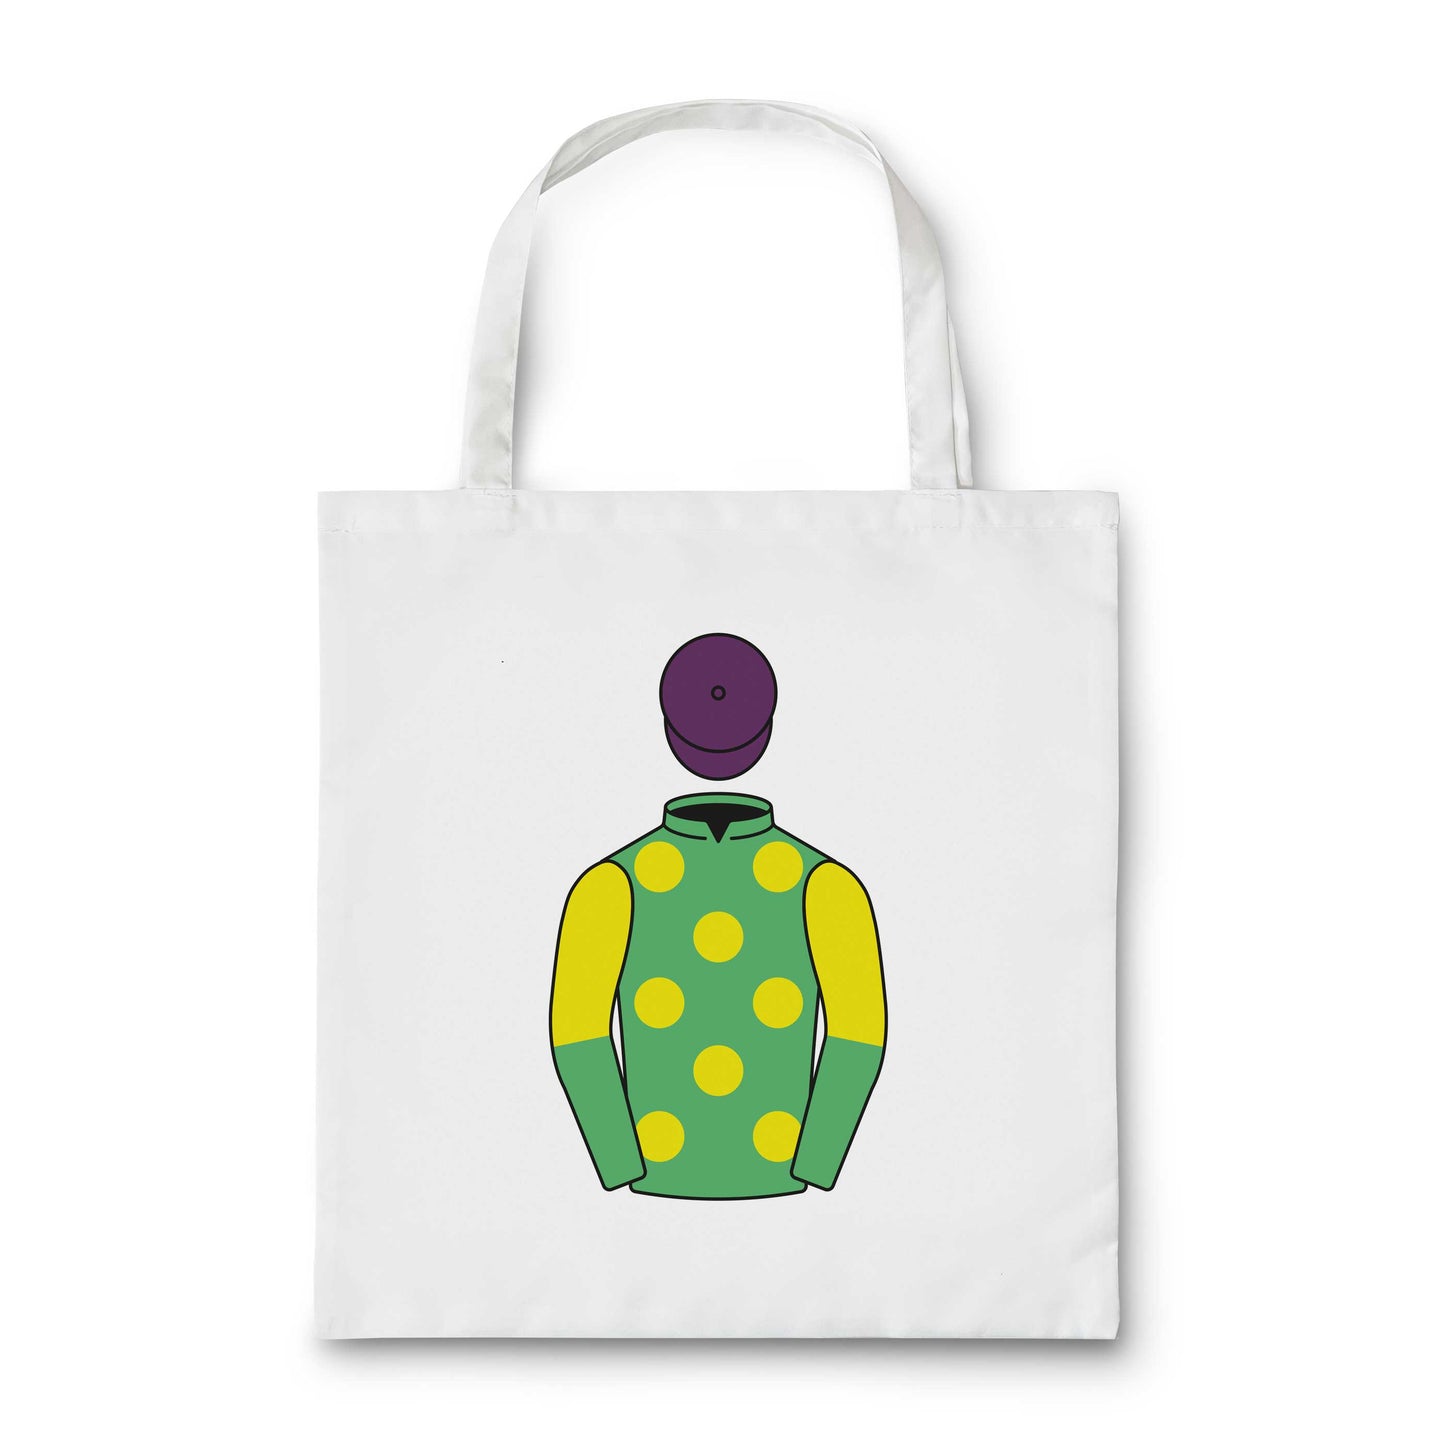 Clive Smith Tote Bag - Tote Bag - Hacked Up